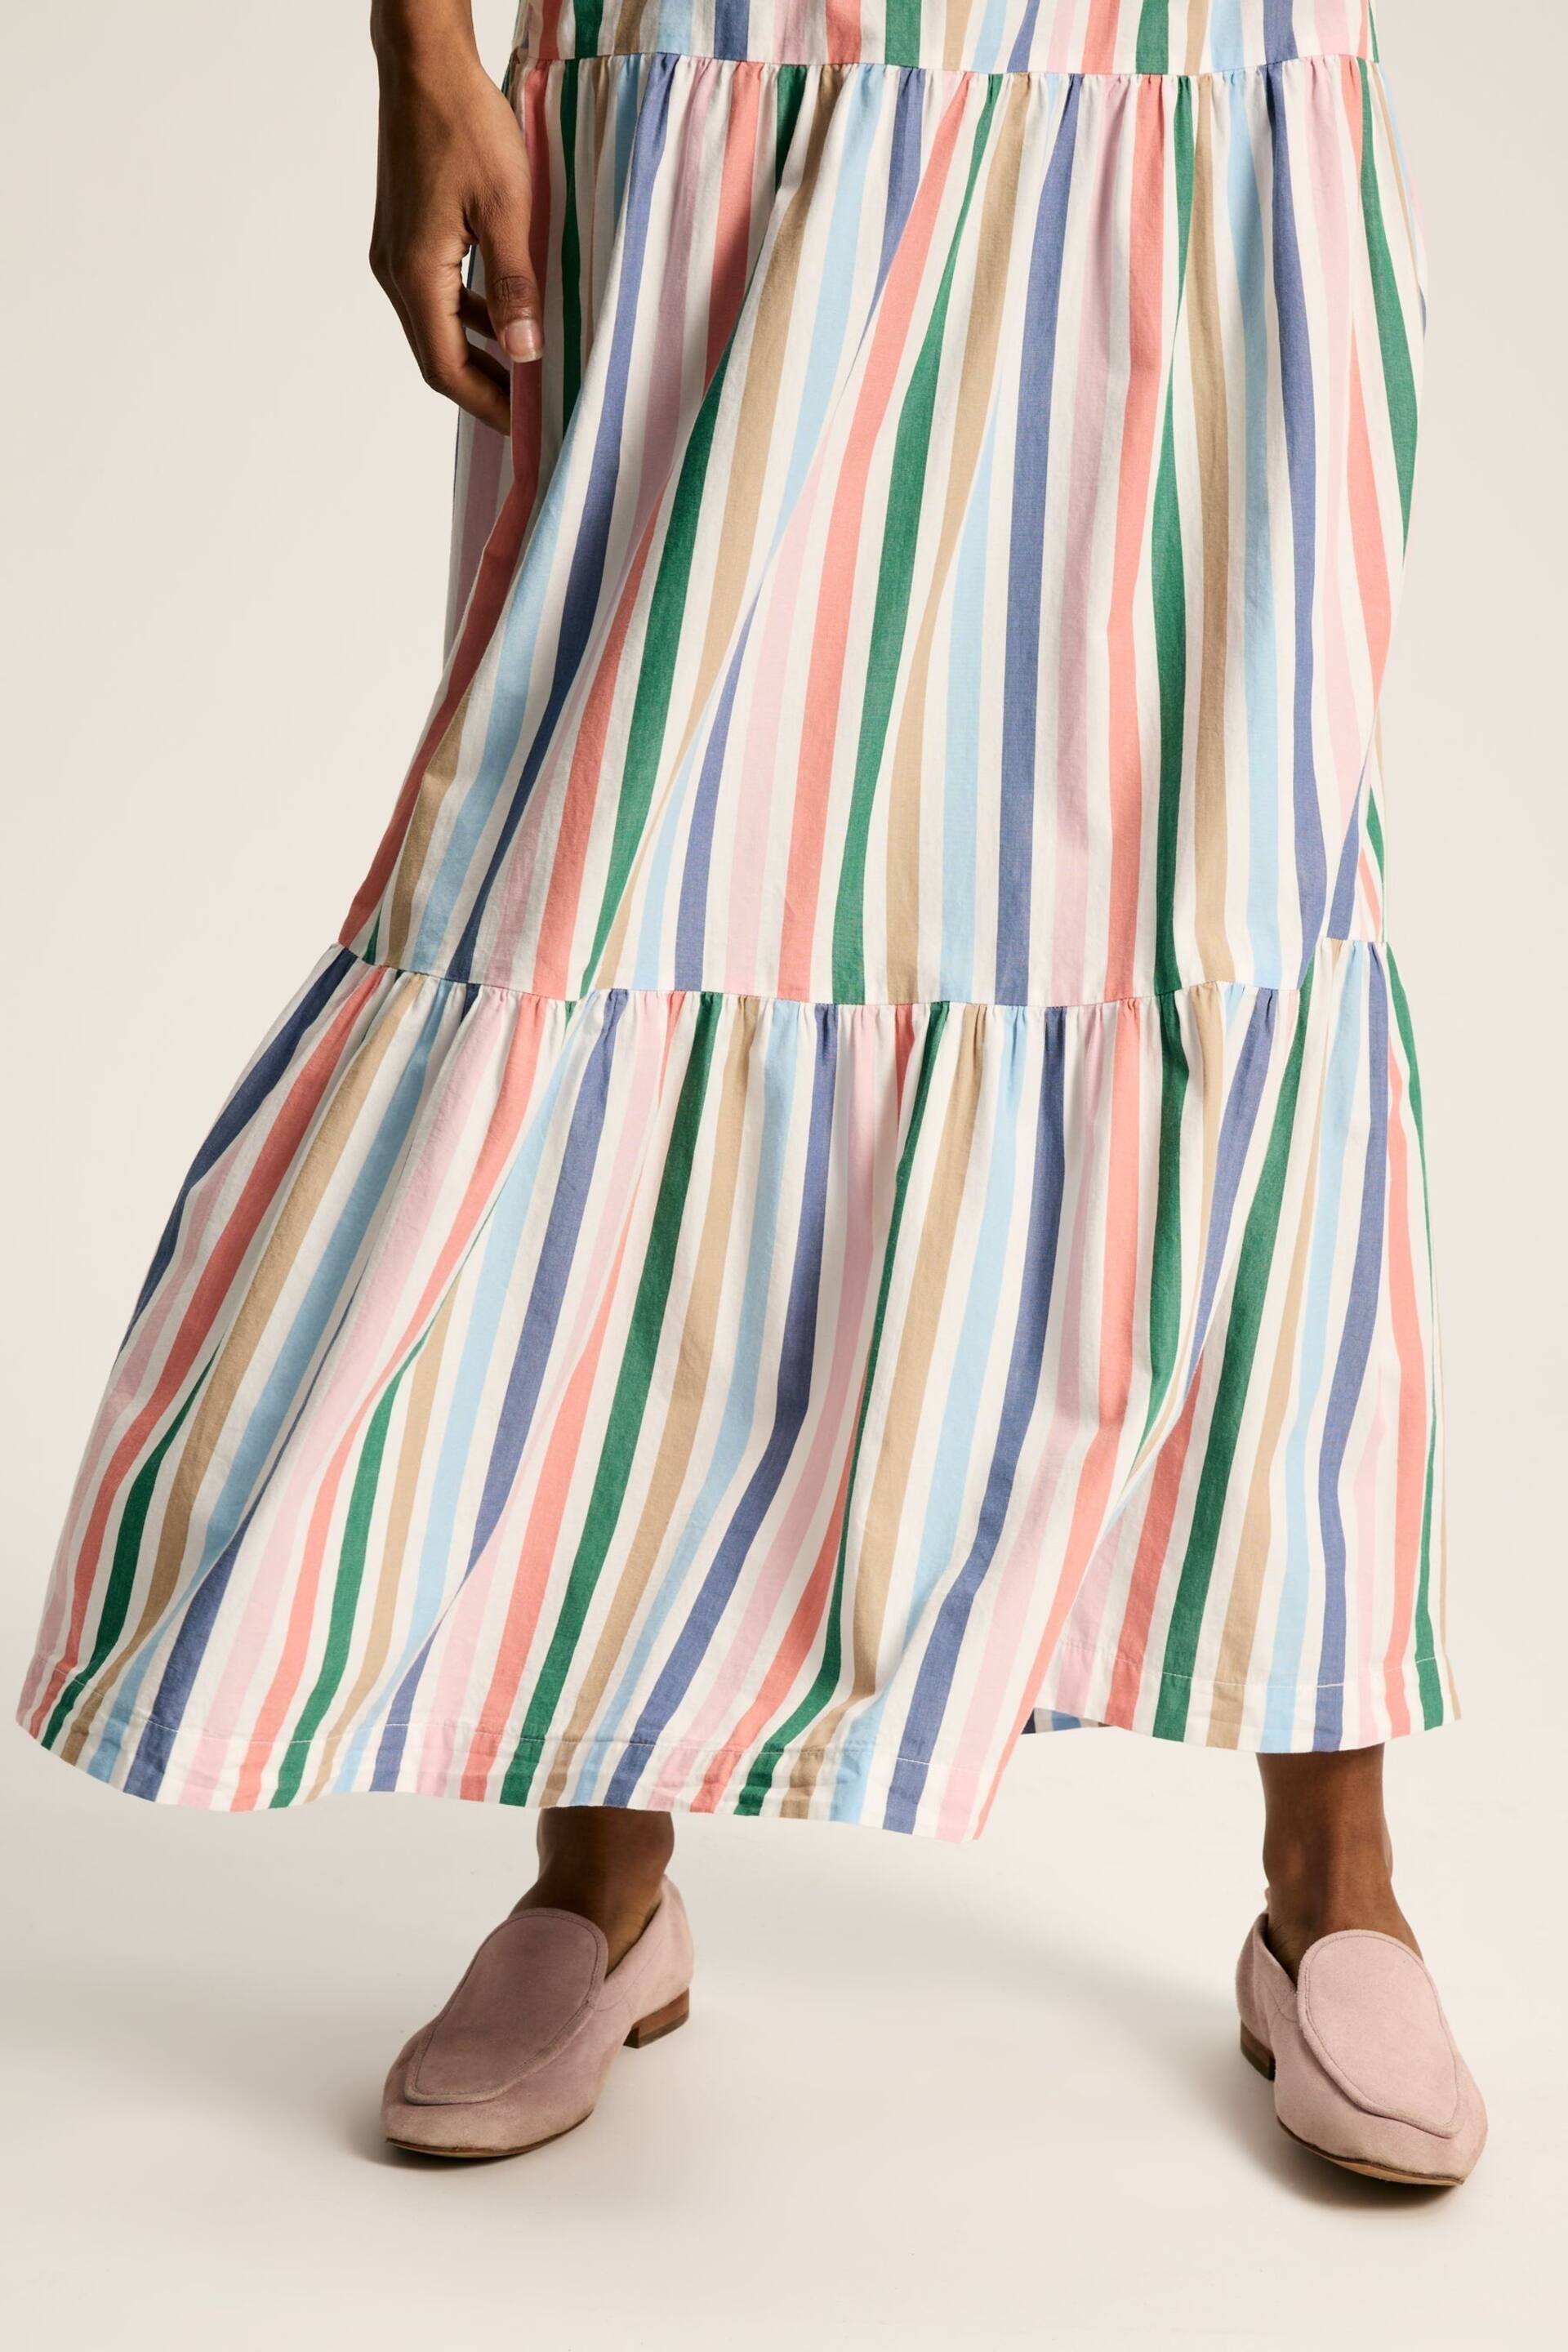 Joules Cynthia Stripe Tiered Co-ord Skirt - Image 3 of 8